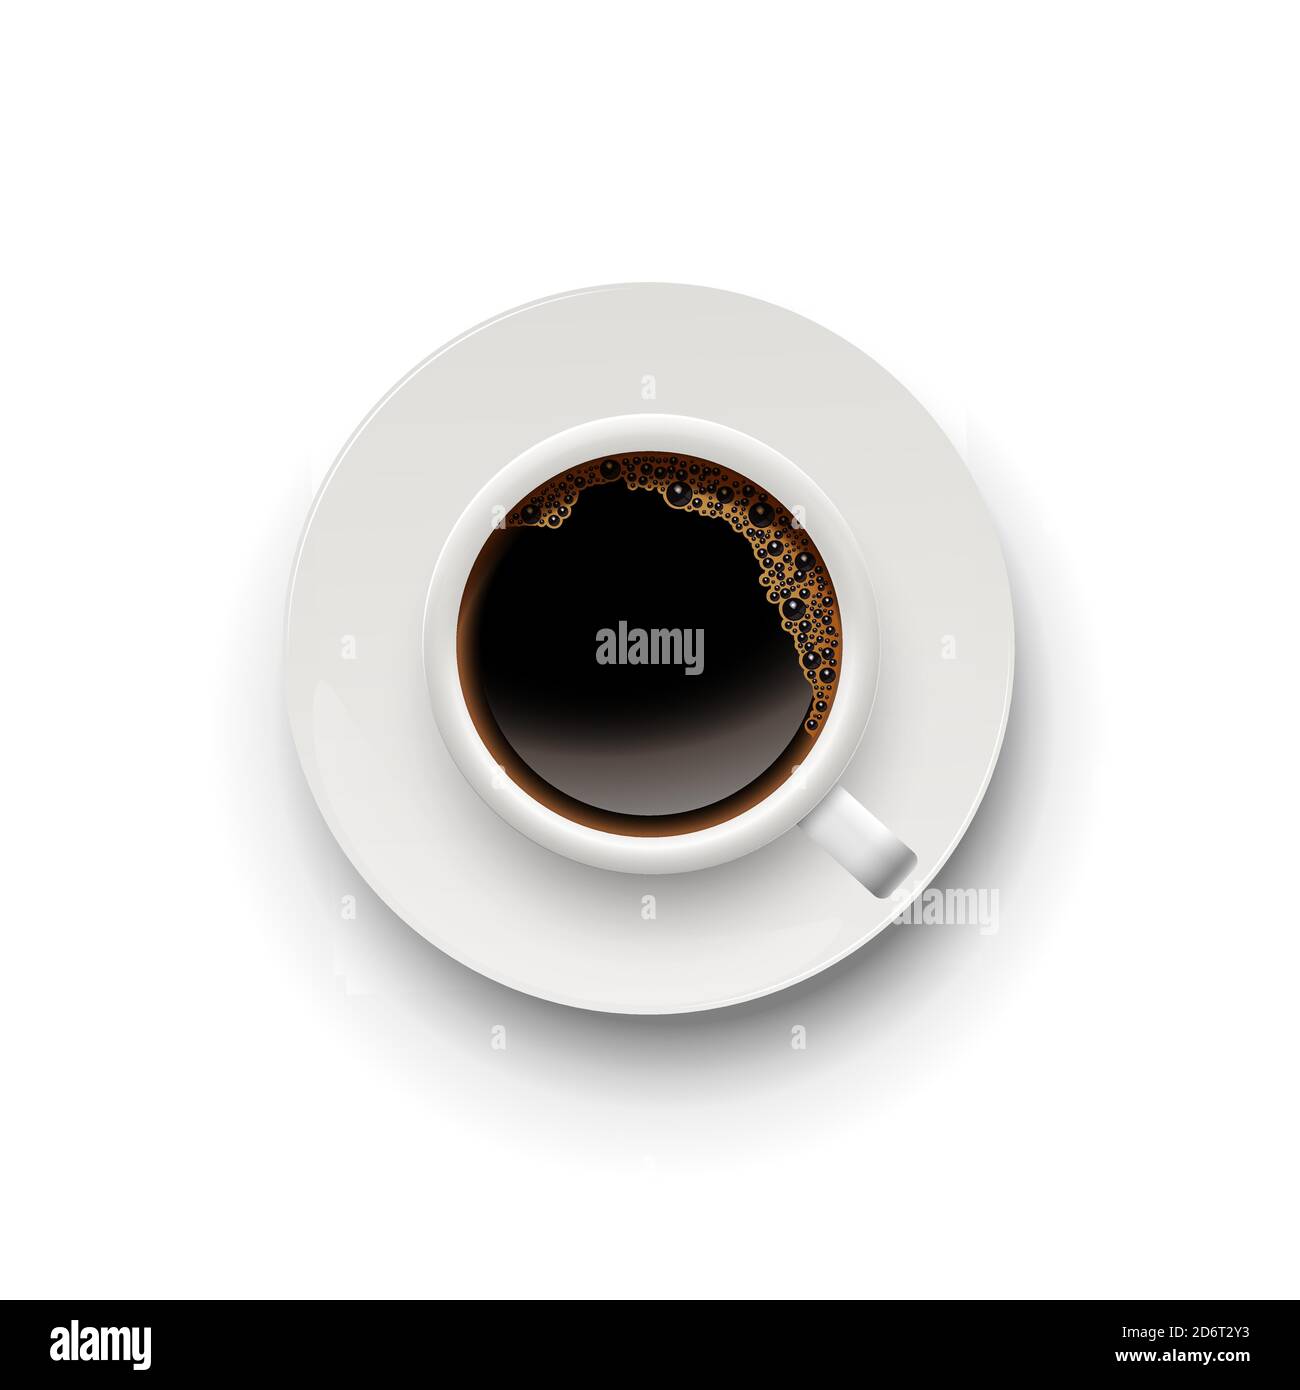 https://c8.alamy.com/comp/2D6T2Y3/cup-of-coffee-on-saucer-hot-caffeine-in-mug-top-view-morning-breakfast-relaxation-vector-illustration-aromatic-beverage-on-white-background-2D6T2Y3.jpg